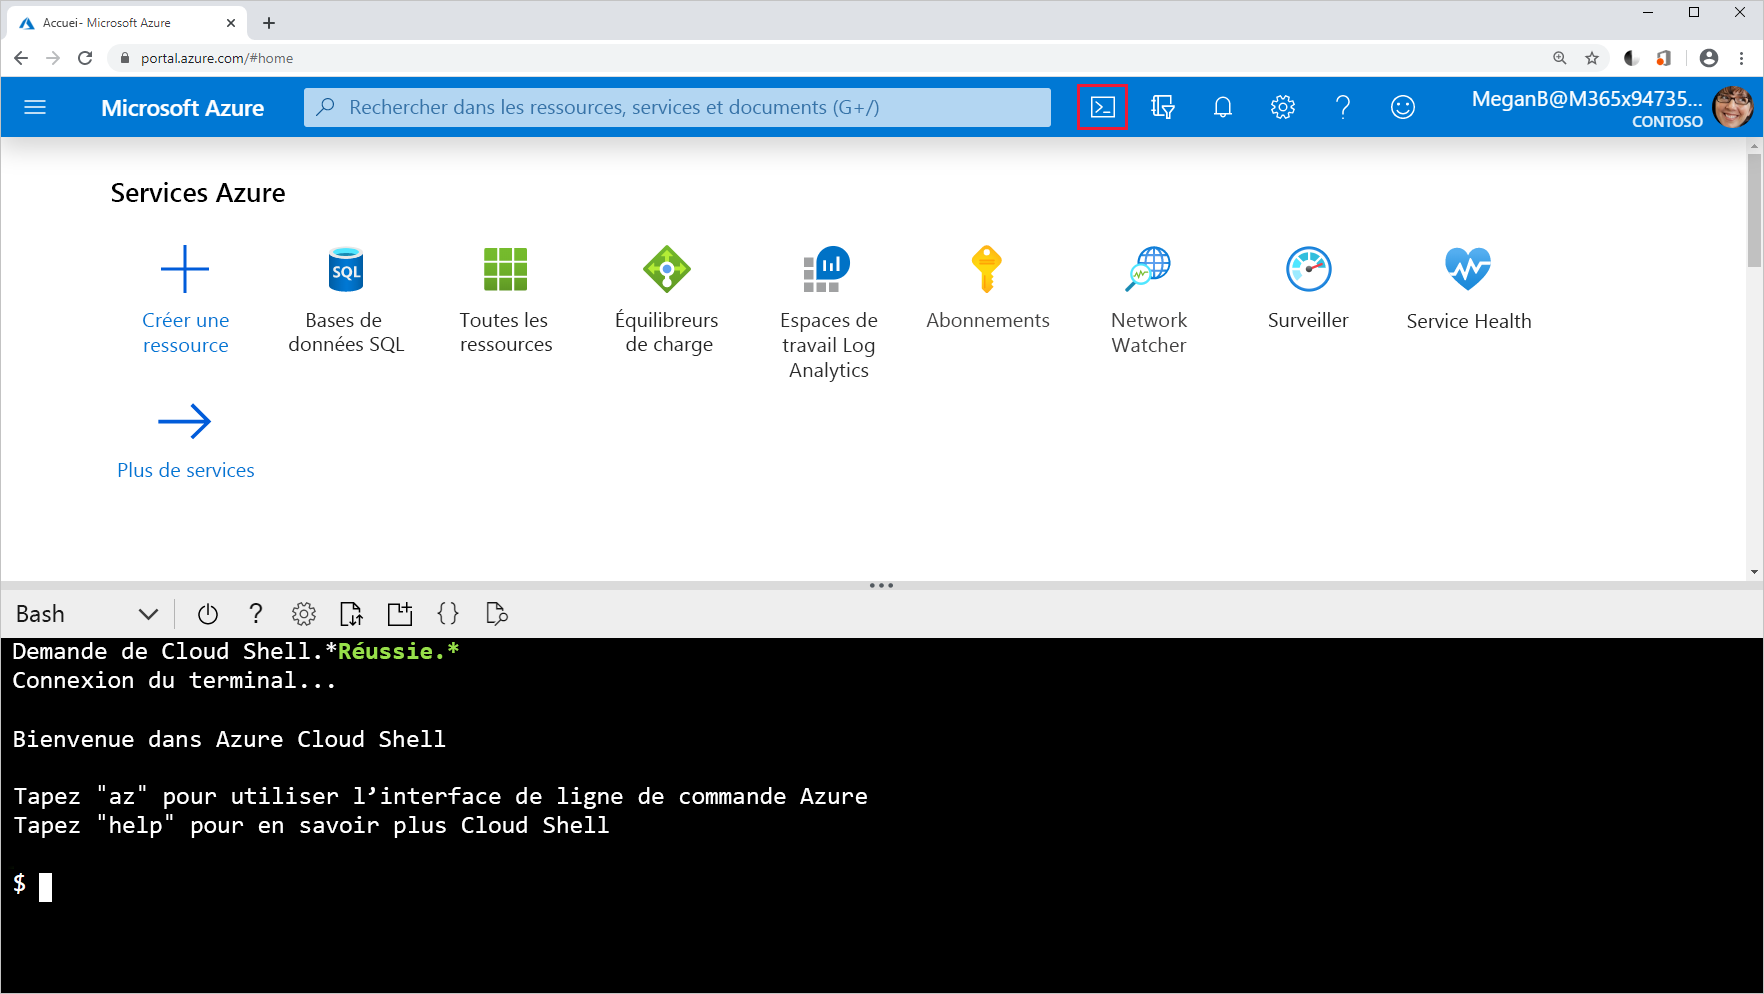 Screenshot of the Cloud Shell icon in the Azure portal.